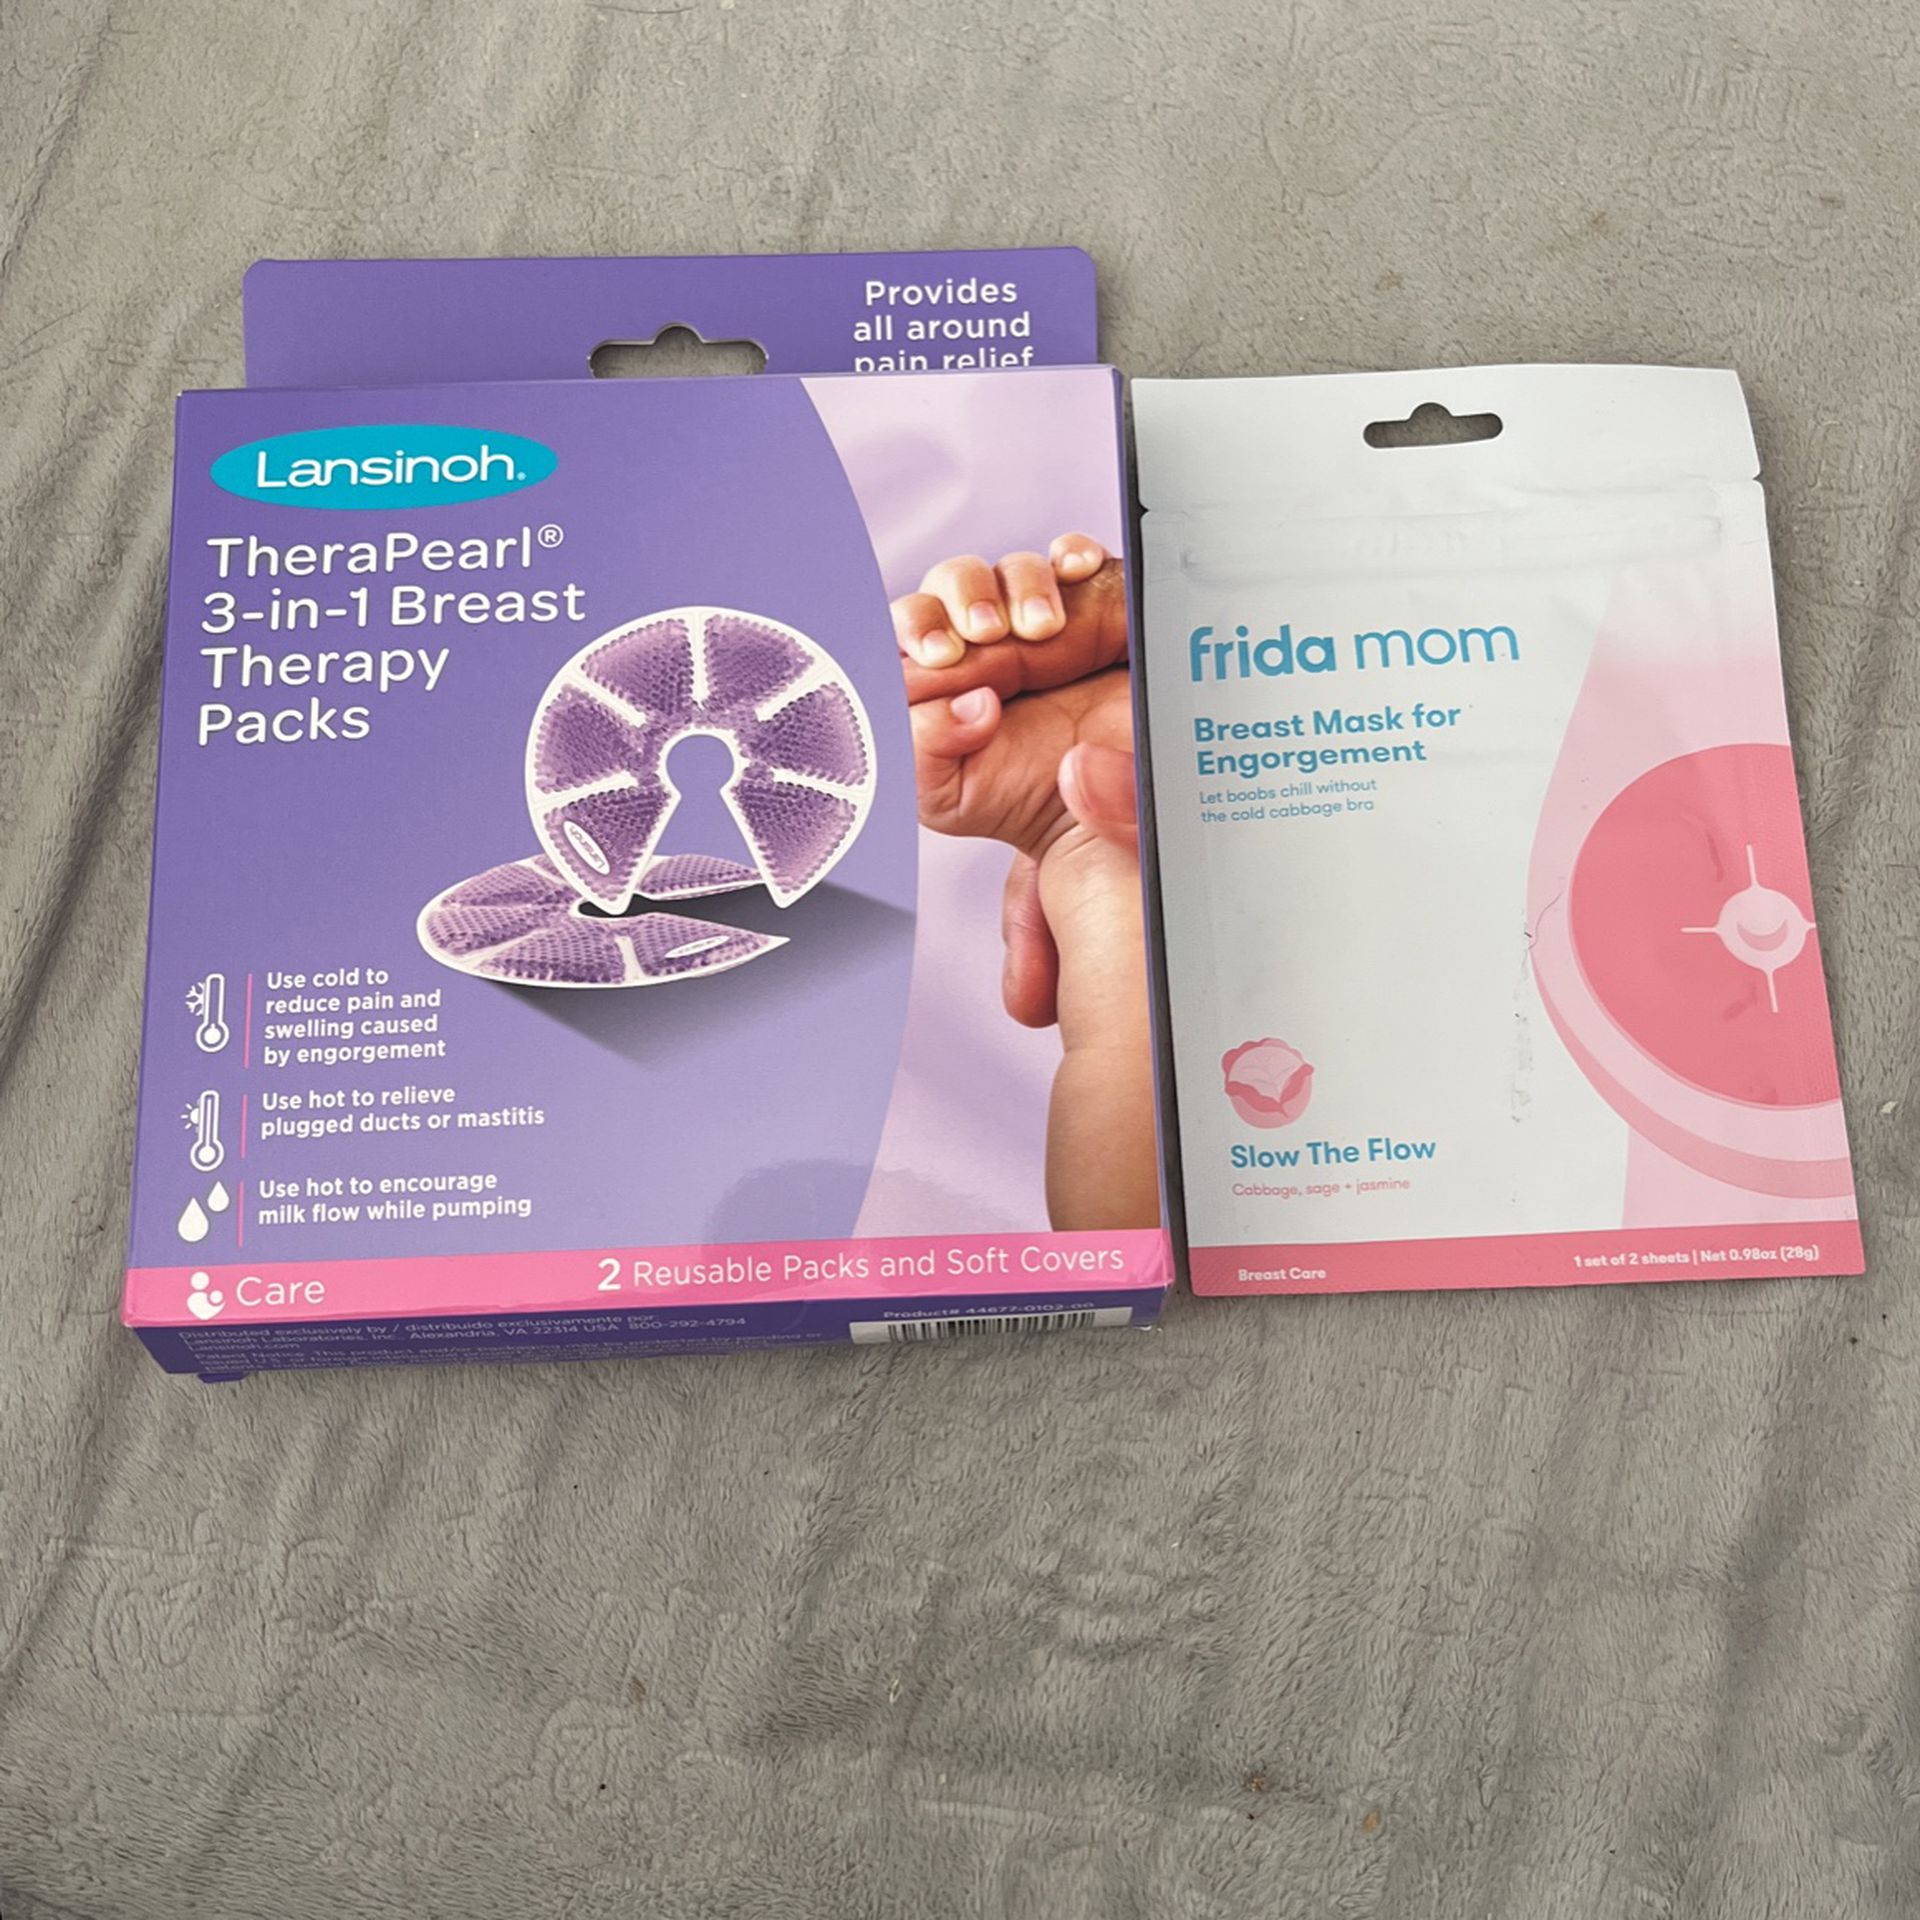 Lansinoh Therapearl 3 In 1 Breast Therapy Packs And Frida Mom Breast Mask  For Engorgement for Sale in Honolulu, HI - OfferUp